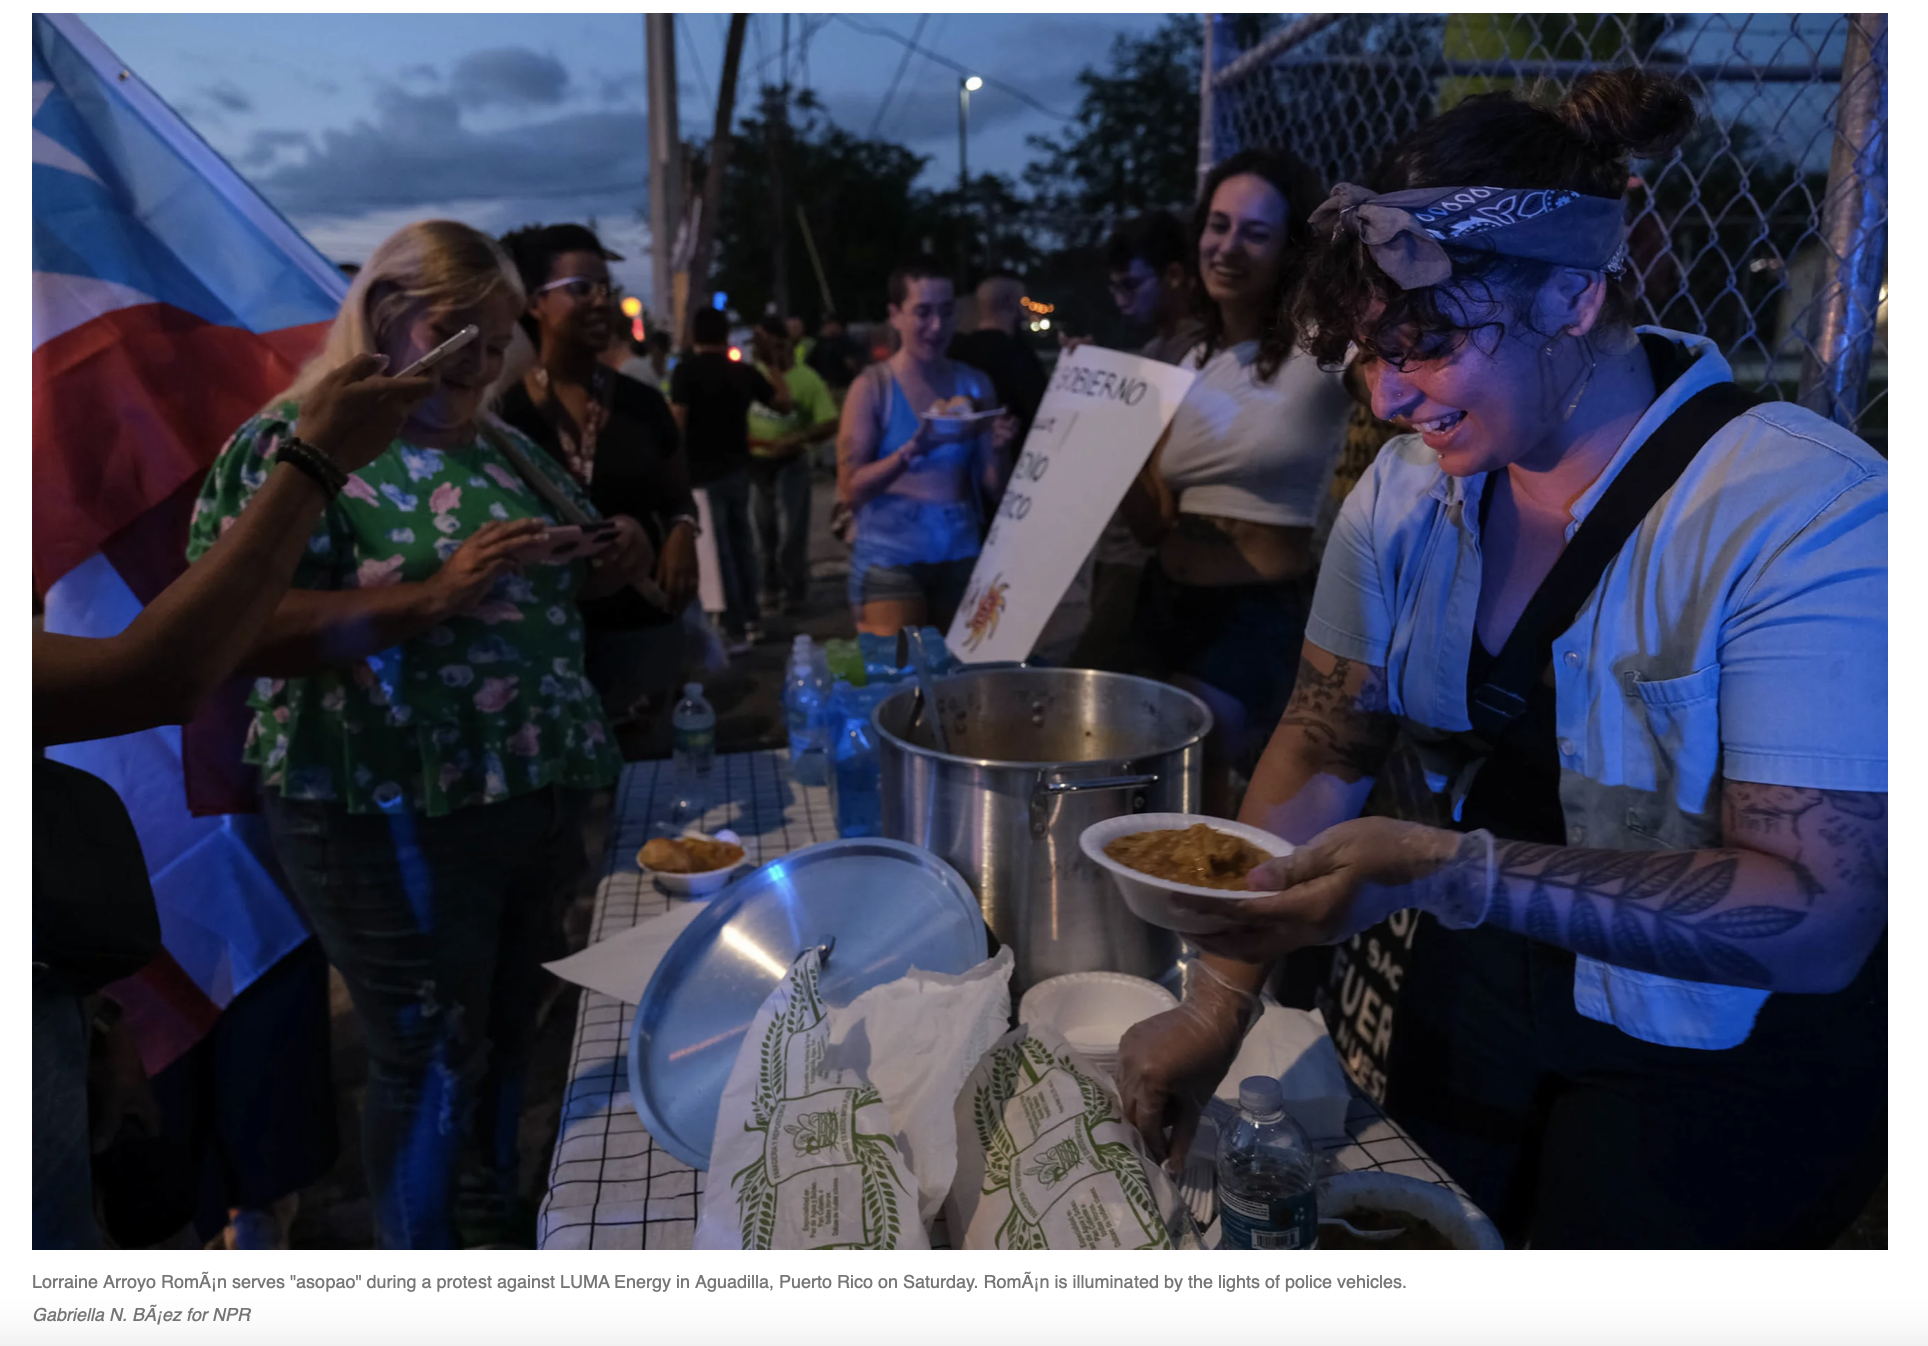 NPR: As hurricanes put Puerto Rico's government to the test, neighbors keep each other fed